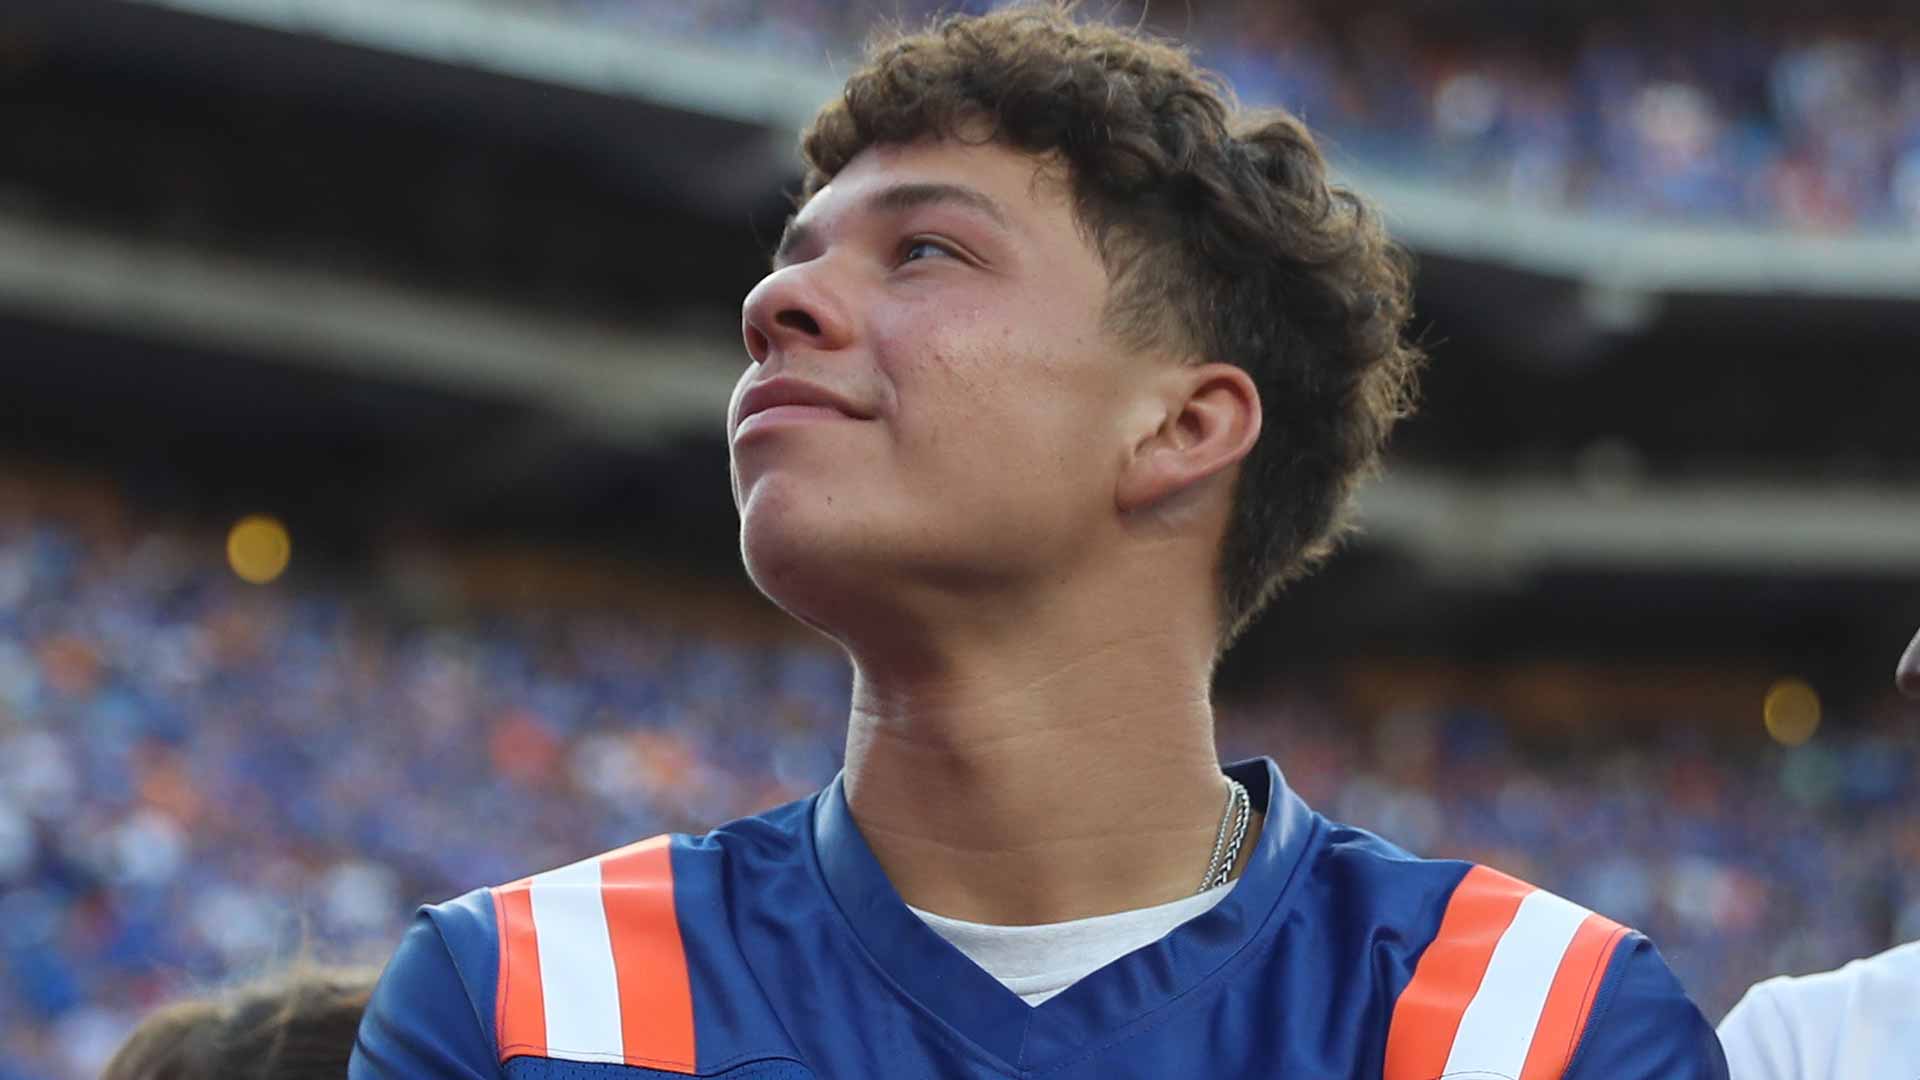 Ben Shelton watches on during the University of Florida's football game against the University of Tennessee on Saturday inside Ben Hill Griffin Stadium.